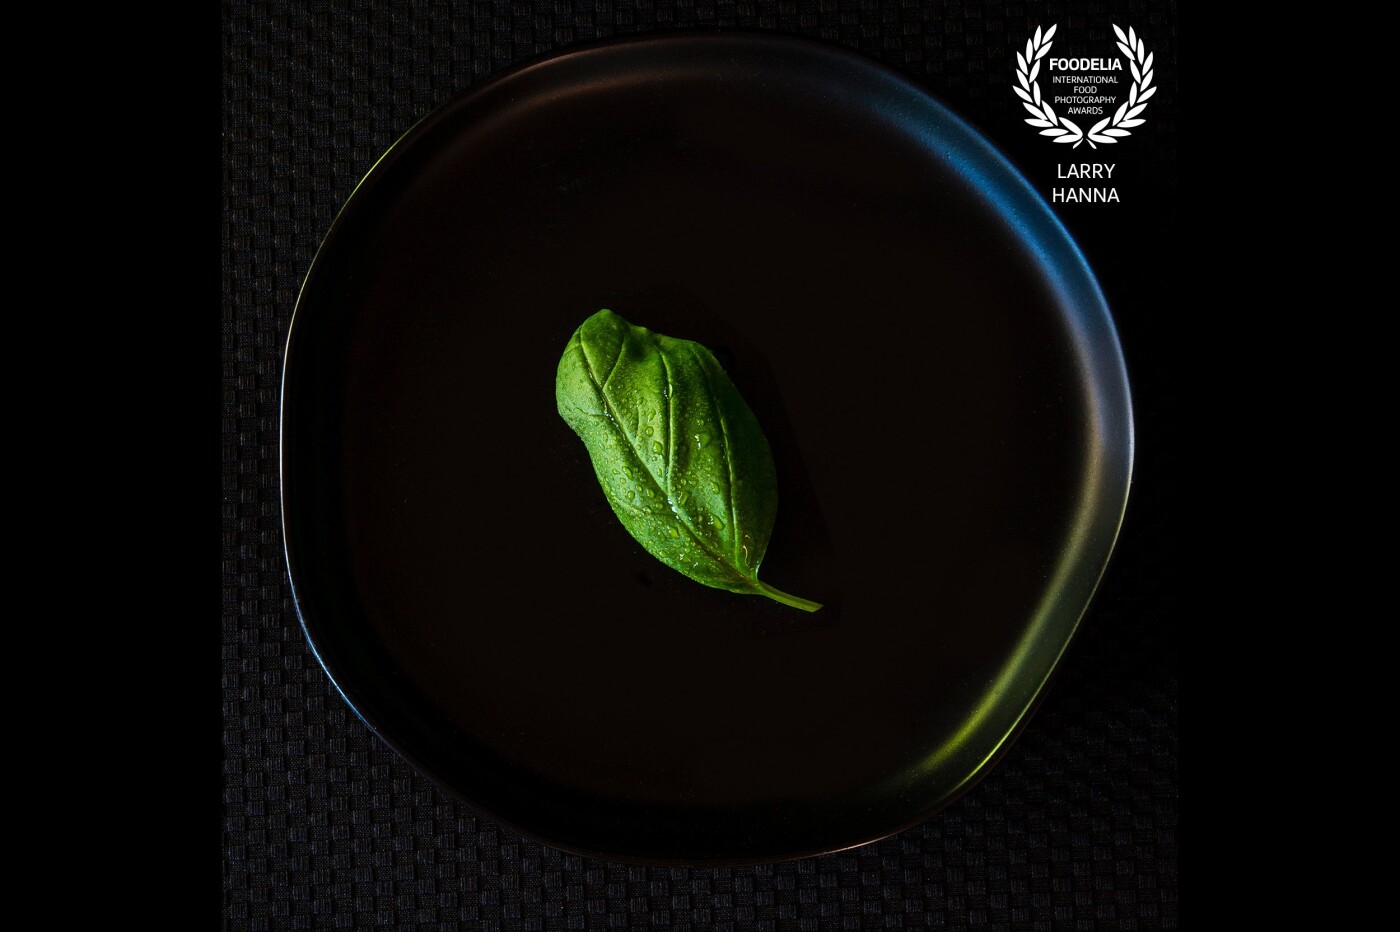 I have always loved the beauty of basil leaves.  However, they are usually only seen as part of a food dish.  I chose to showcase this leaf all by itself framed by an irregular round black plate on a blak placemat to isolate the leaf.  Photographed with natural light, my favorite light source.